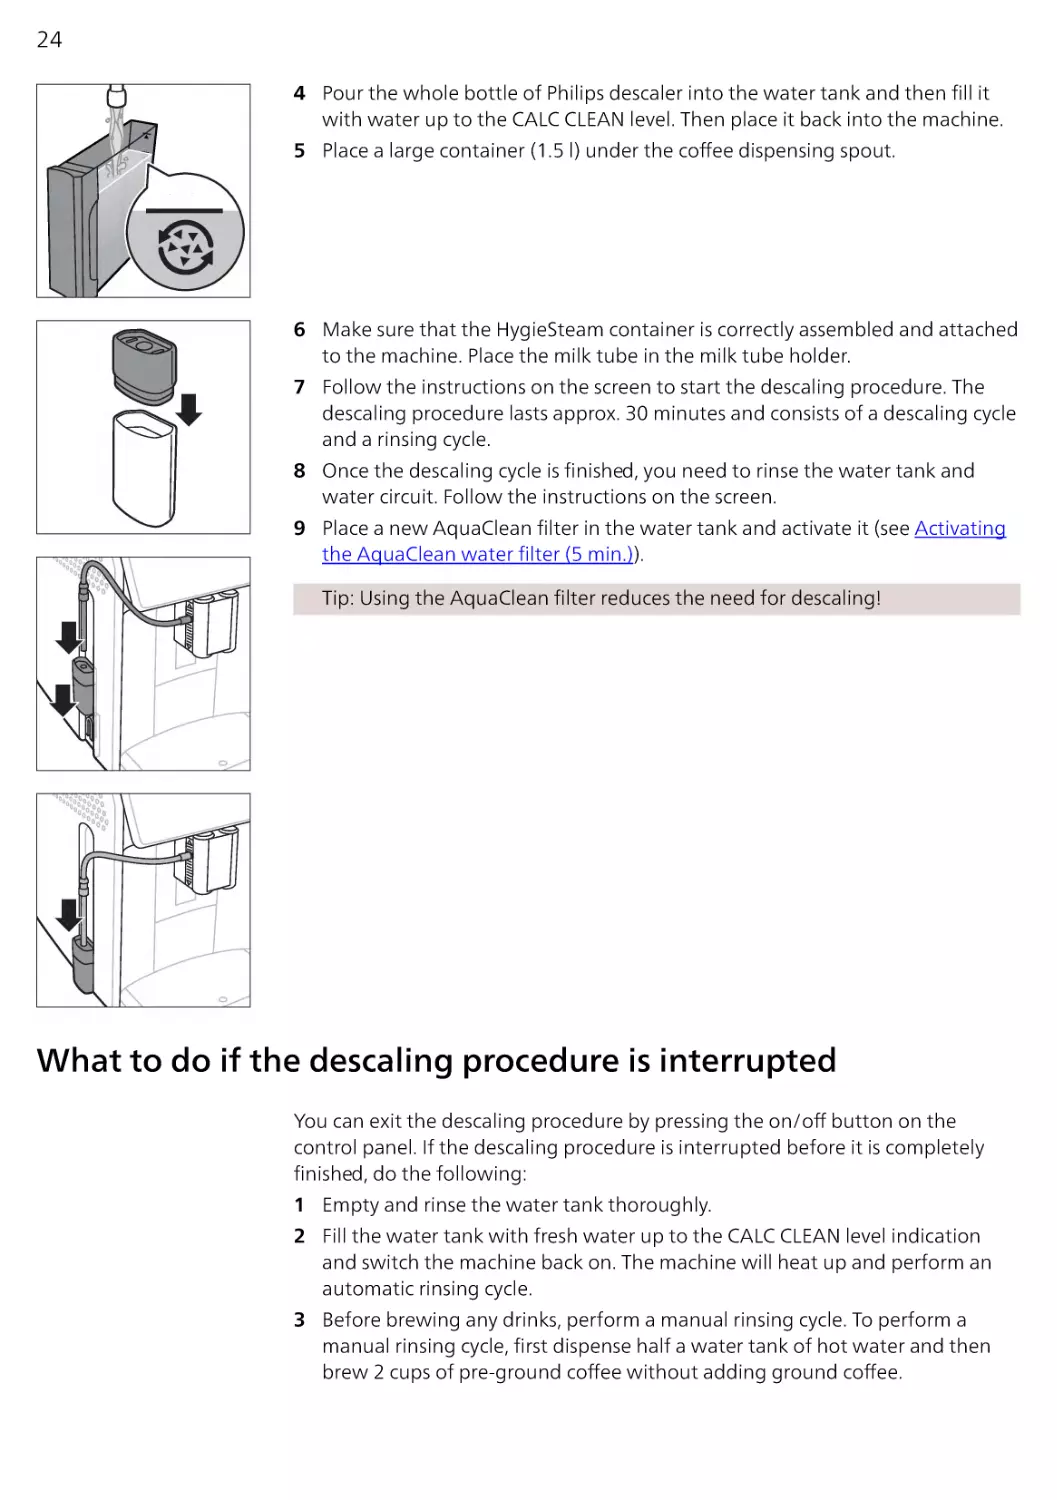 What to do if the descaling procedure is interrupted